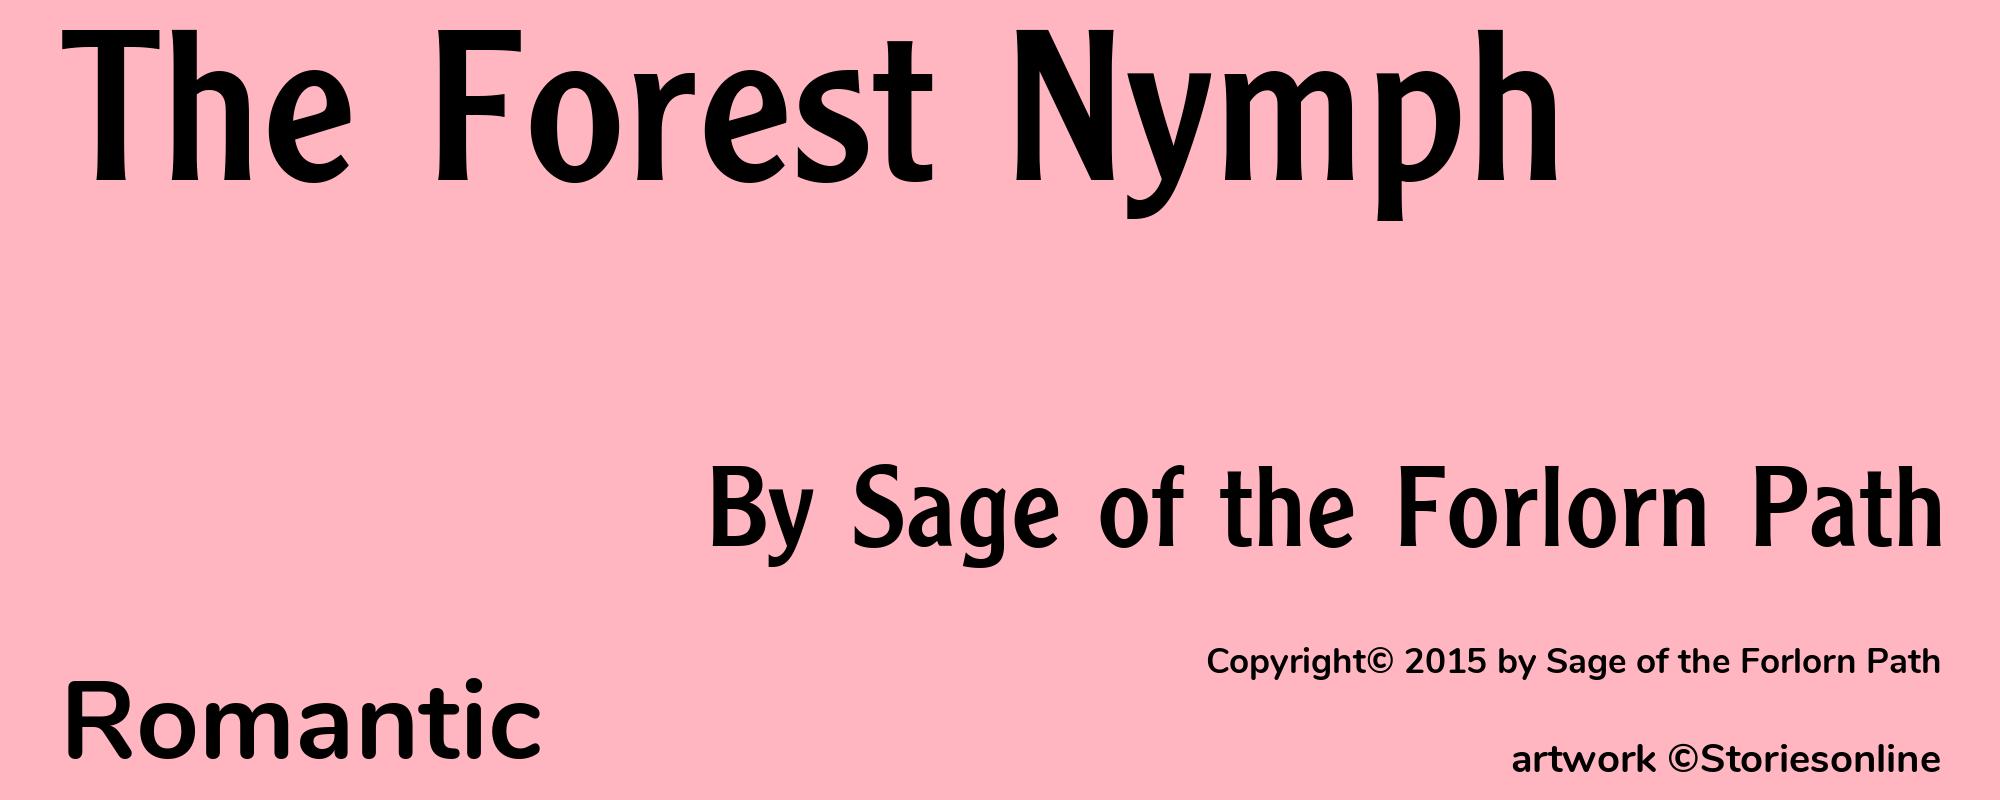 The Forest Nymph - Cover